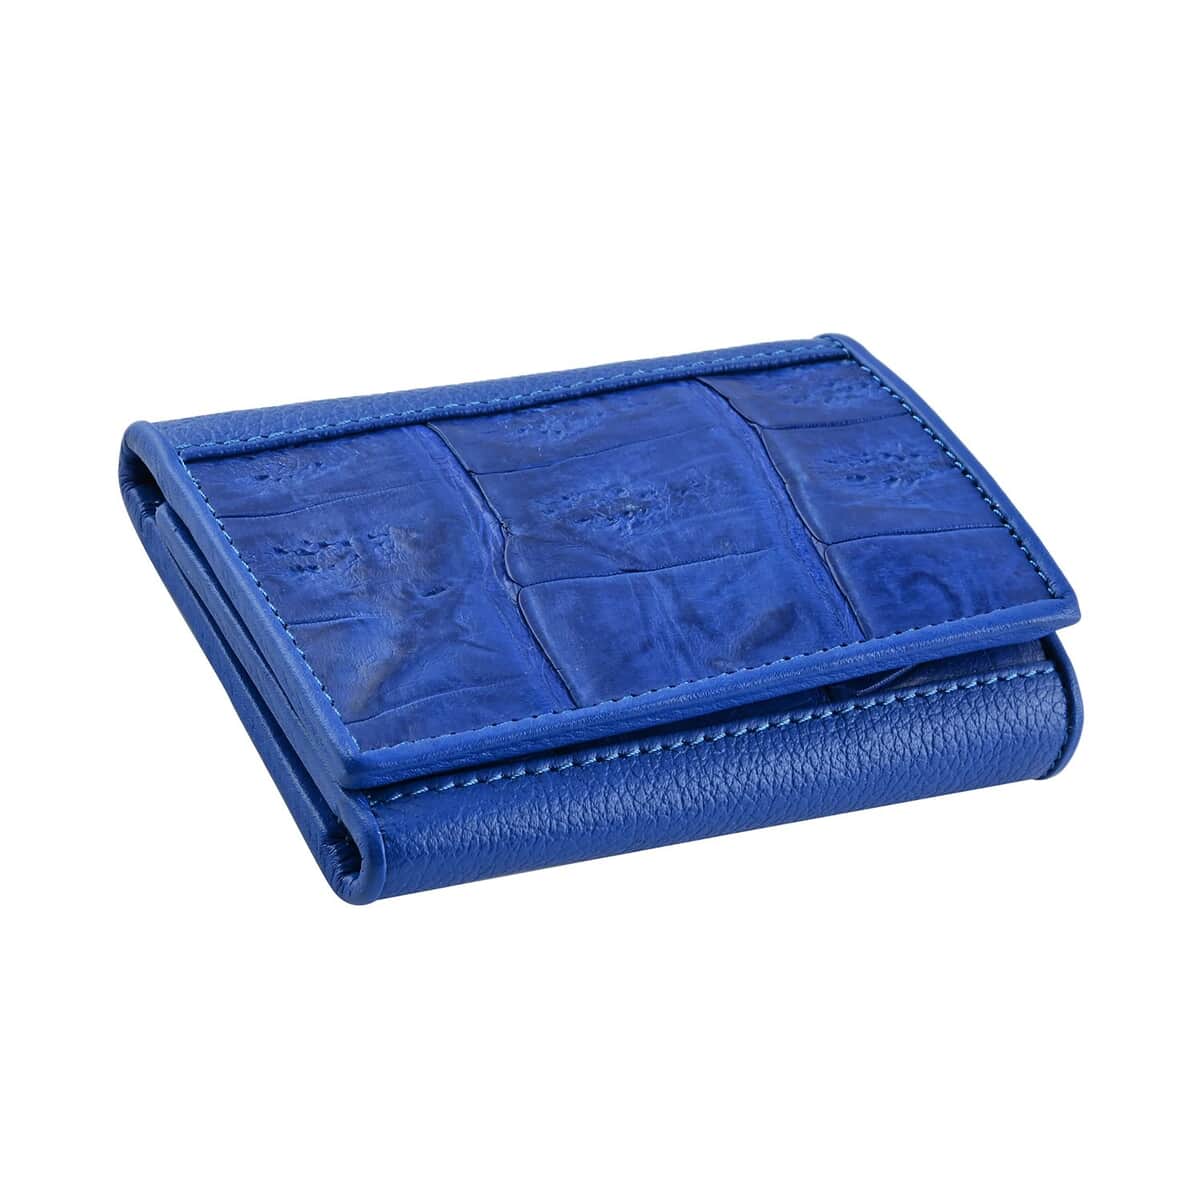 Closeout Brand River Royal Blue Genuine Crocodile Leather Clutch Bag image number 0